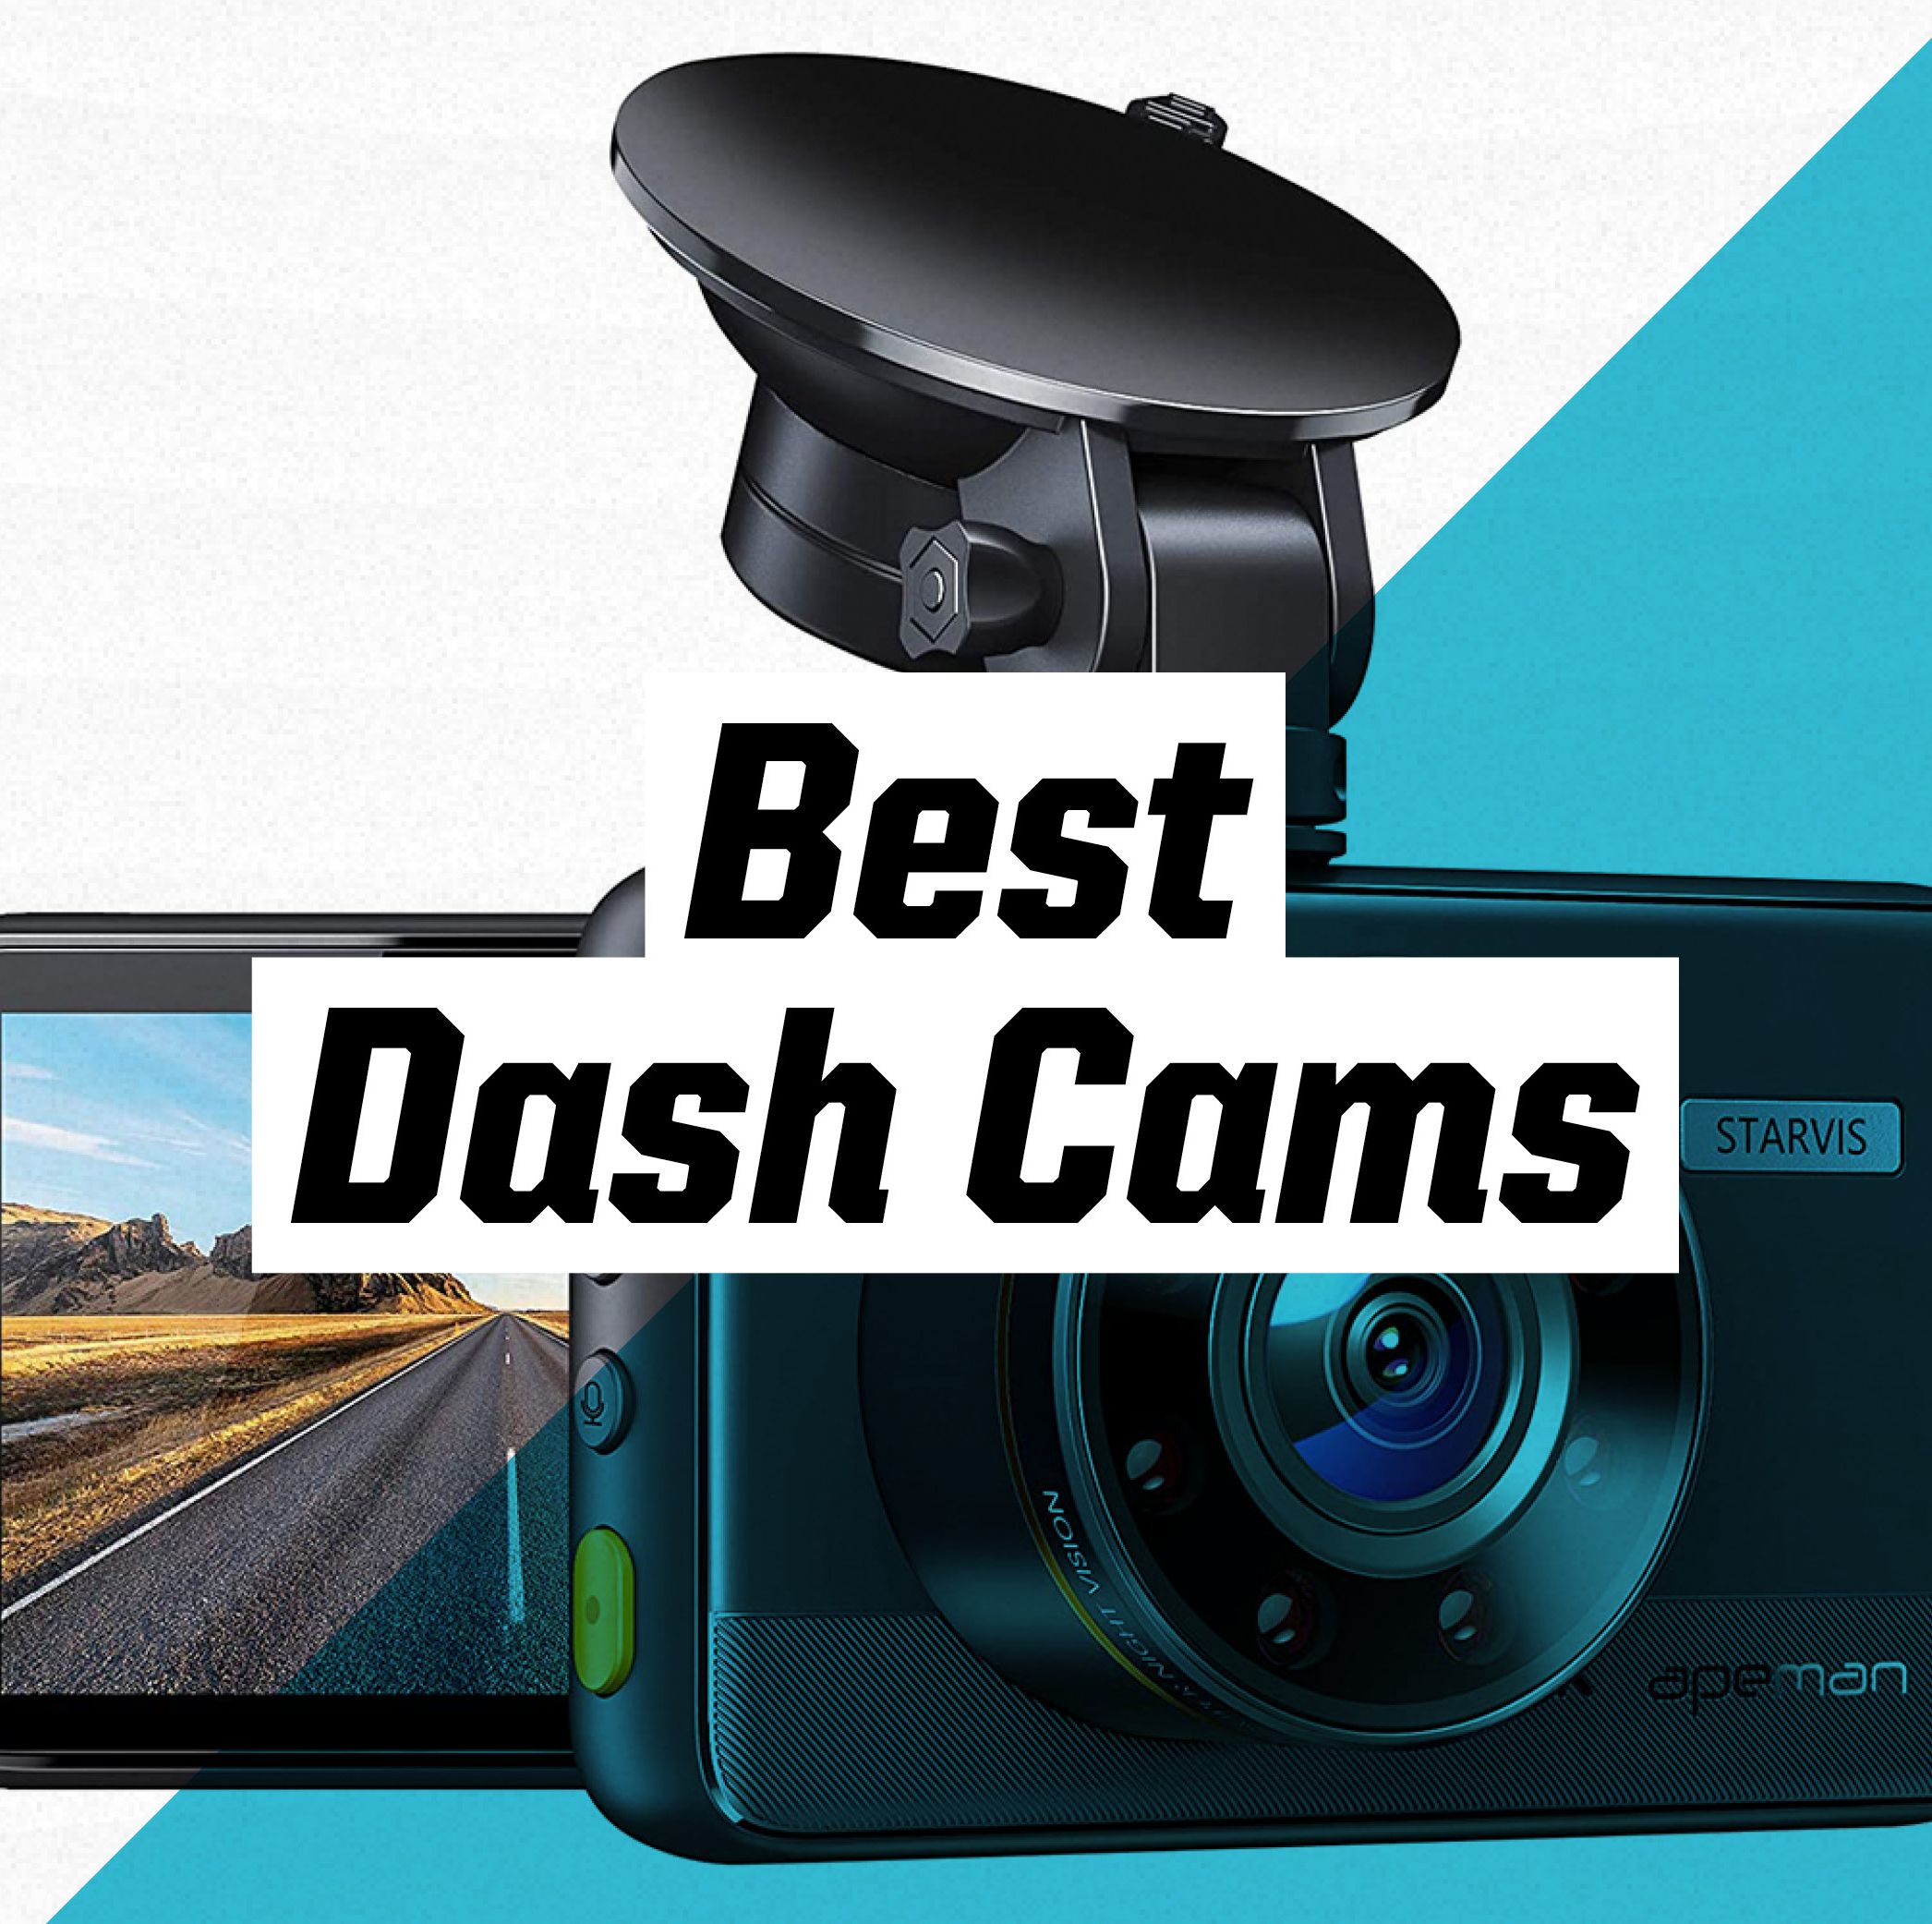 The Best Dash Cams for Your Next Road Trip